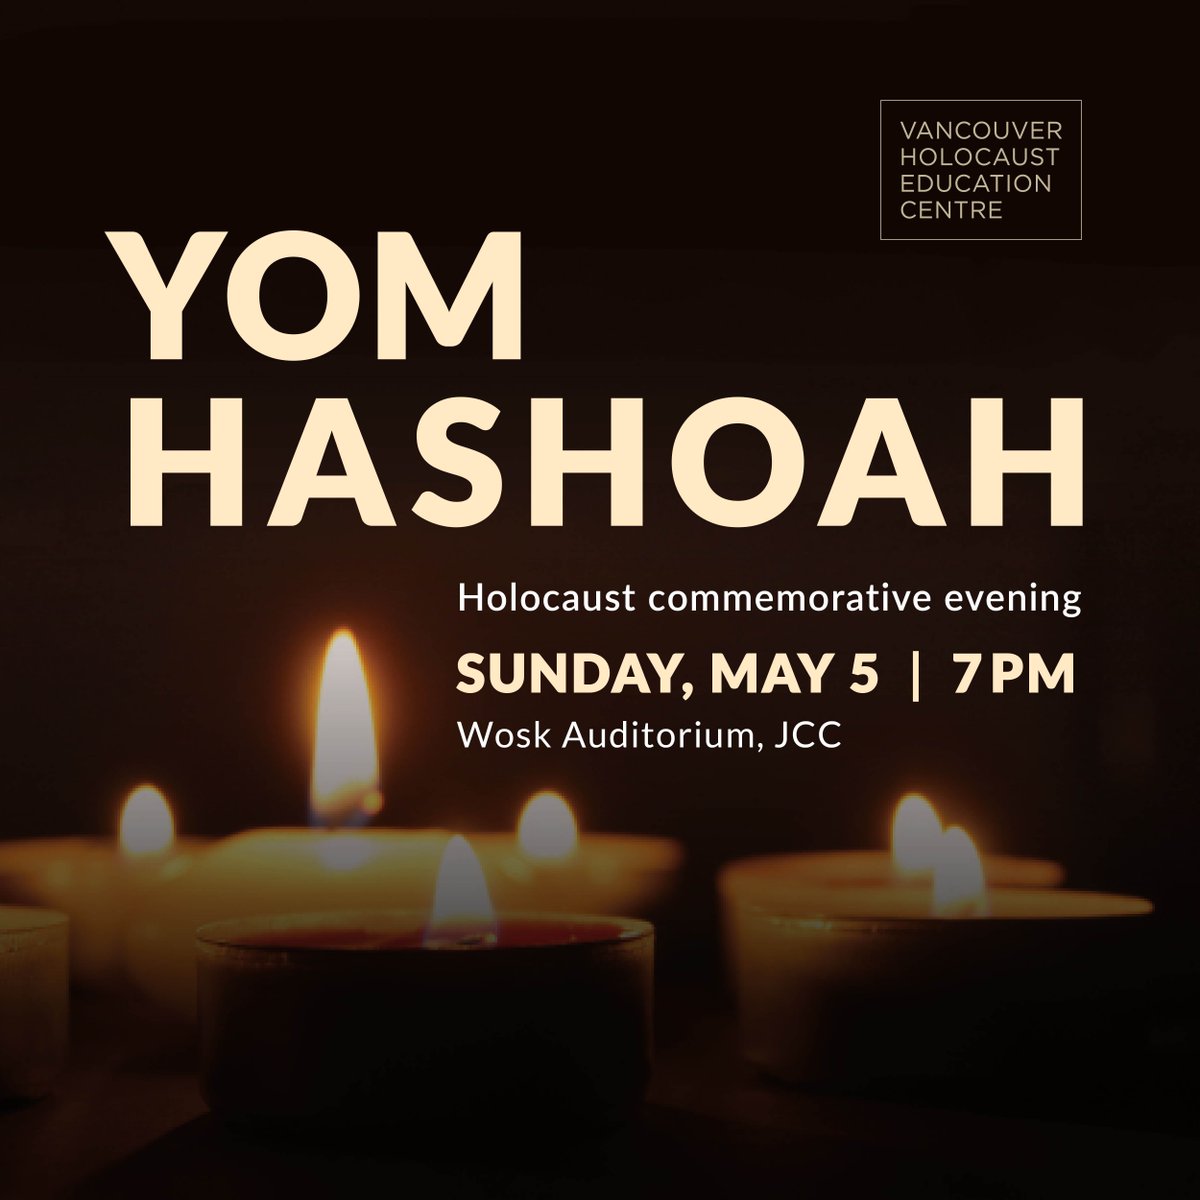 Tonight at 7 PM: Join us for a moving Yom HaShoah commemoration at the @JCCVancouver. Keynote speaker Lillian Boraks-Nemetz, musical performances, and a candle lighting ceremony for survivors. Don't miss this evening of remembrance. buff.ly/3U2nczZ